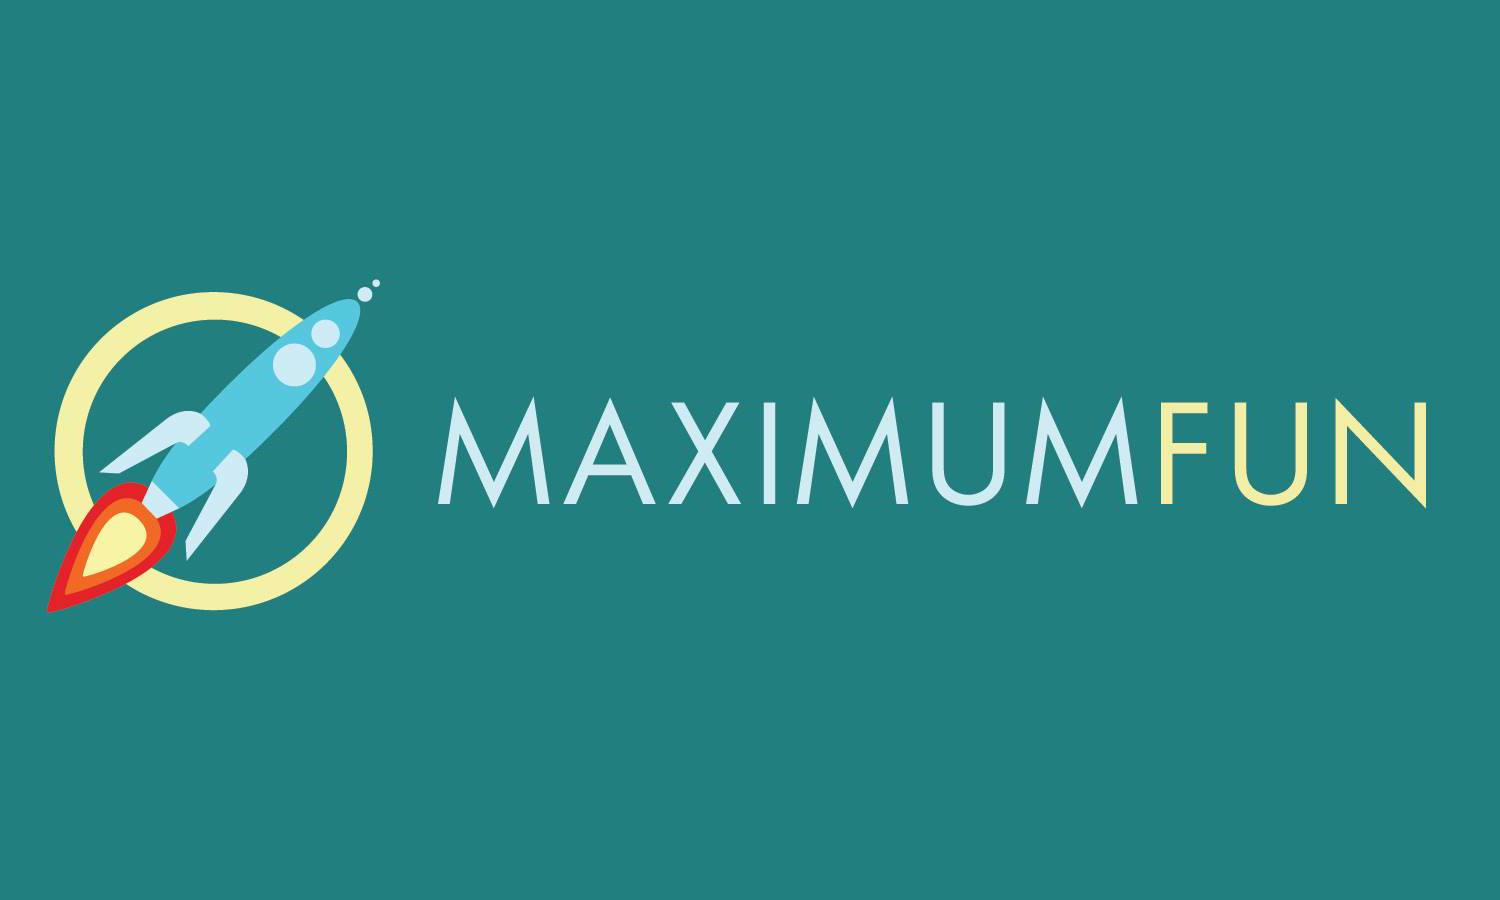 Podcast network Maximum Fun is becoming a worker-owned co-op